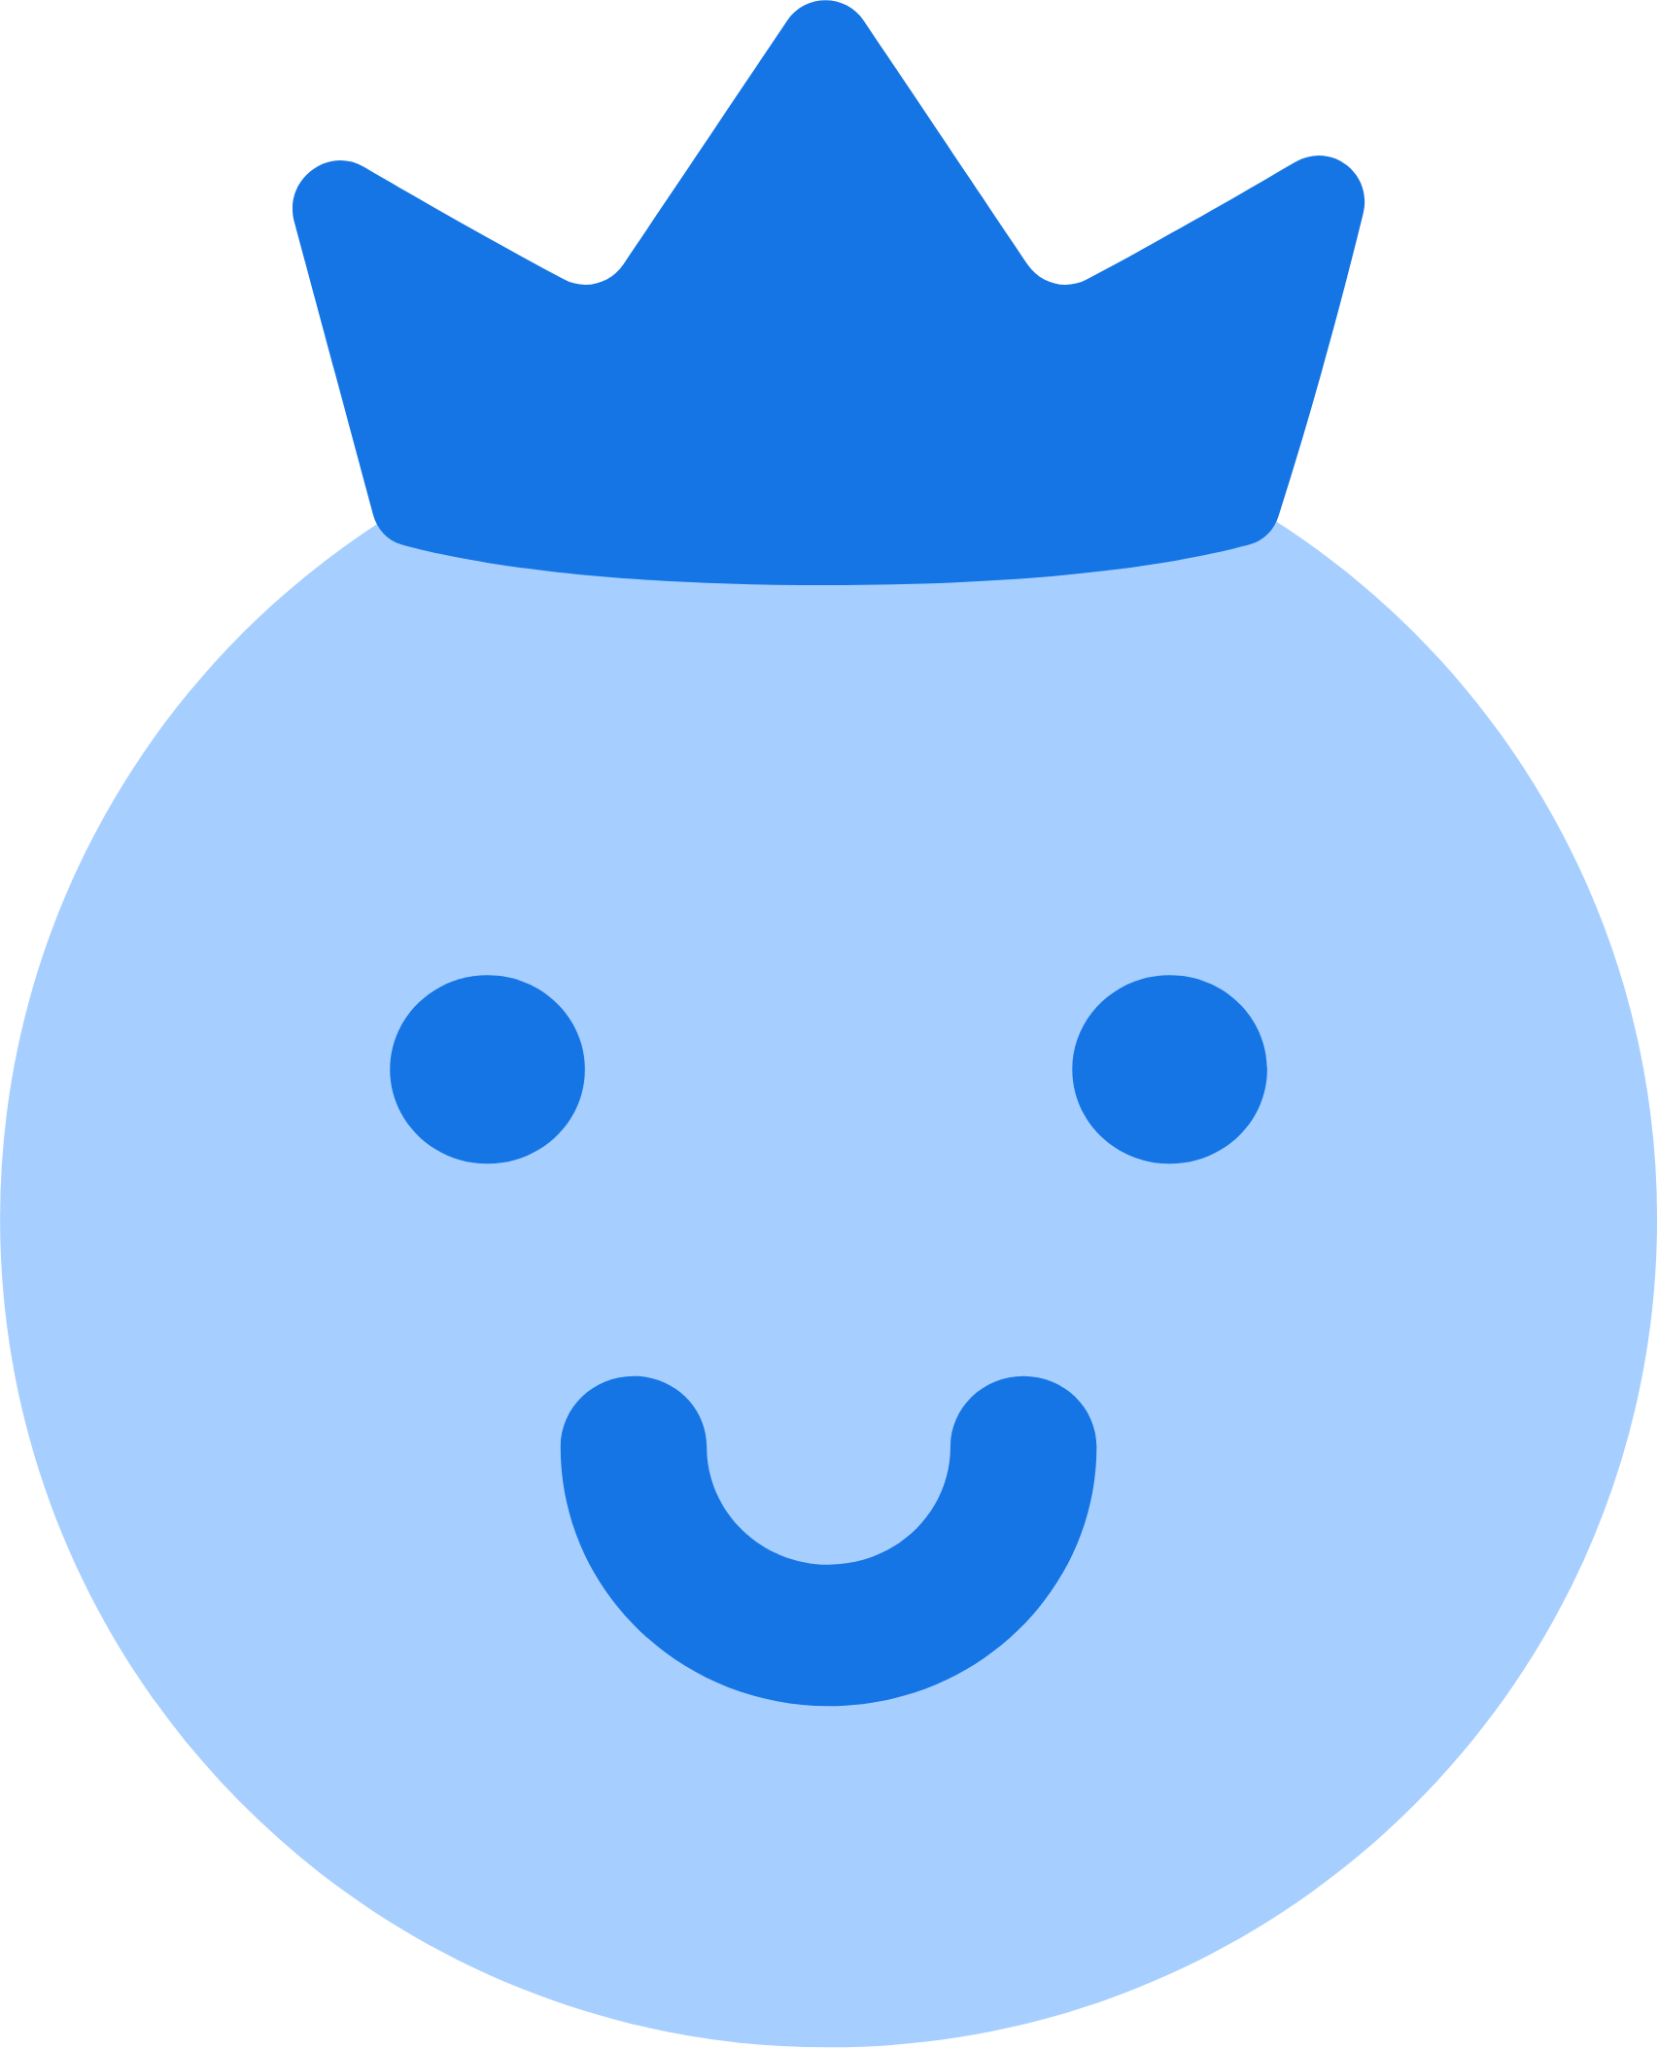 user crown icon